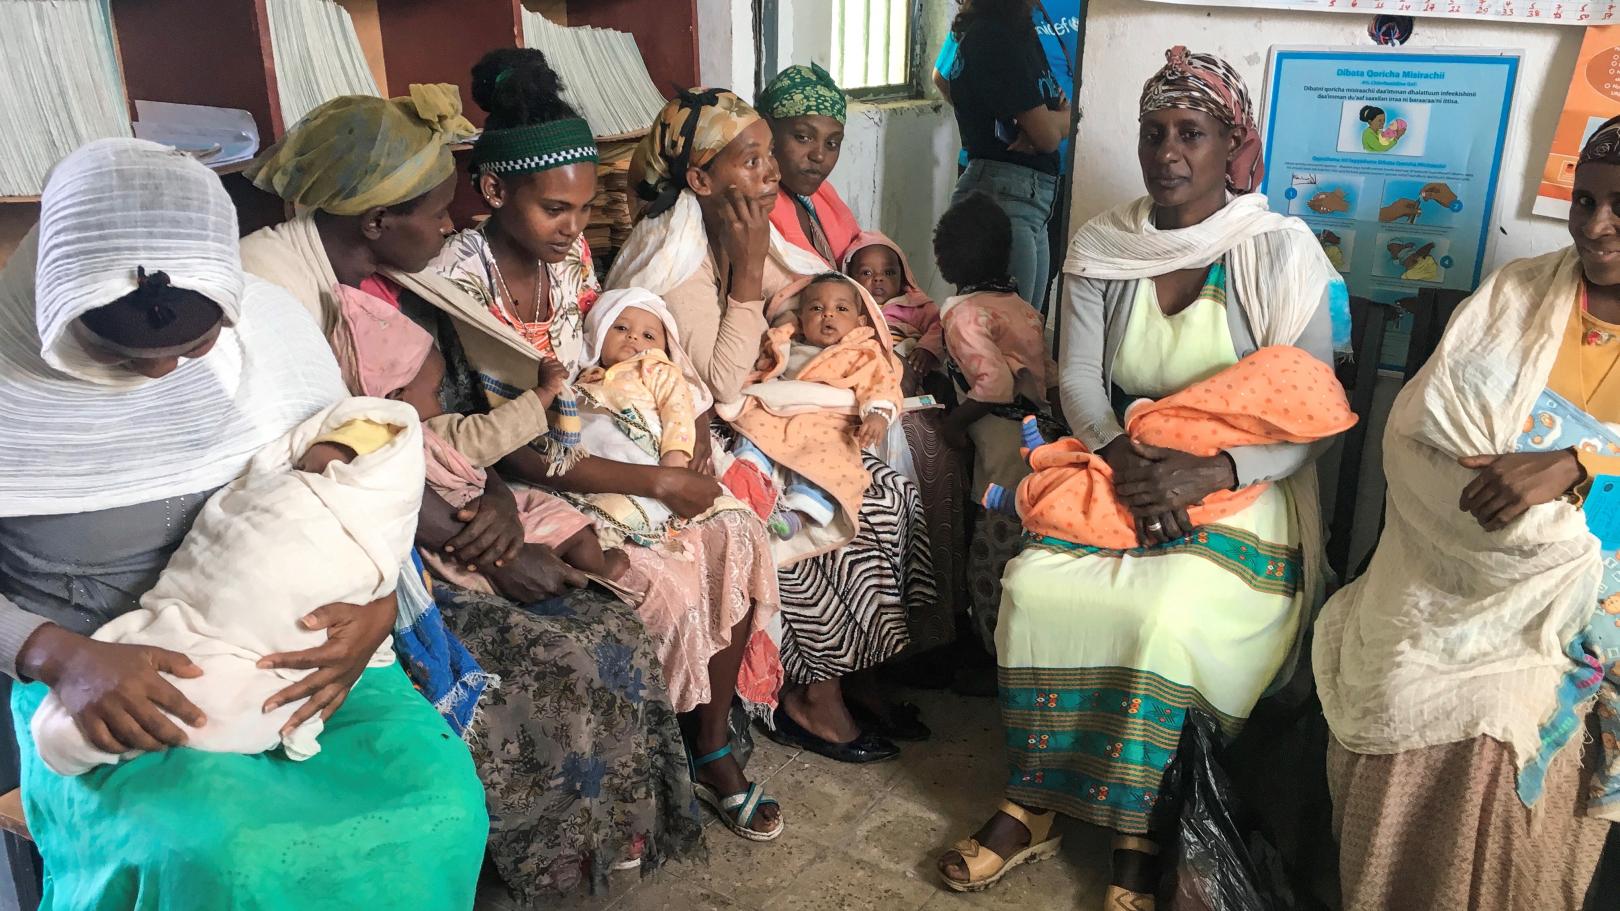 Mothers wait for their babies to receive vaccinations at a rural health post in Chalaba Silassie, Ethiopia.